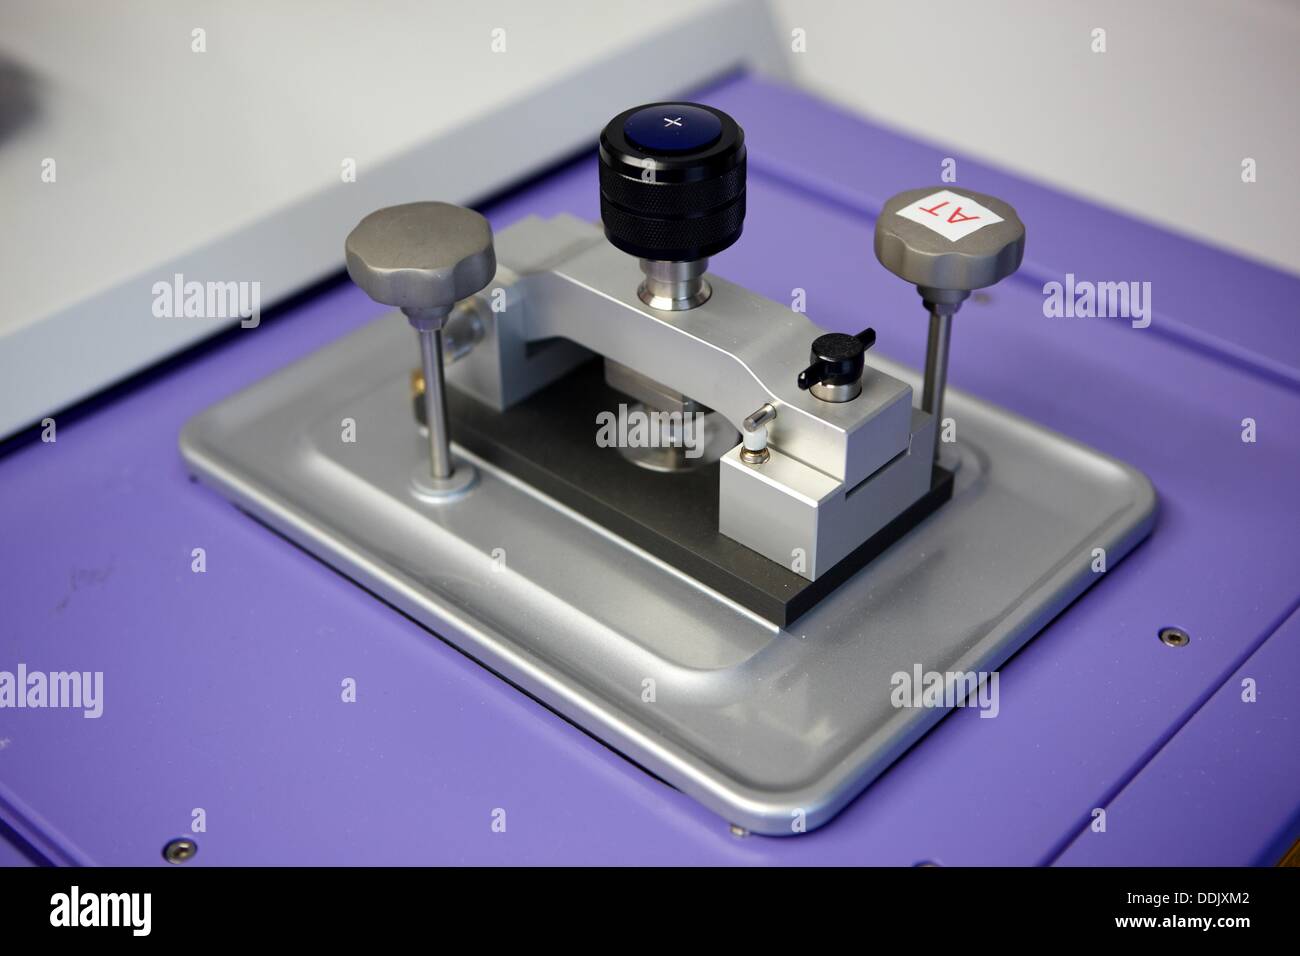 Terahertz spectrometer, Materials Physics Center is a joint center of the Spanish Scientific Research Council CSIC and the Stock Photo